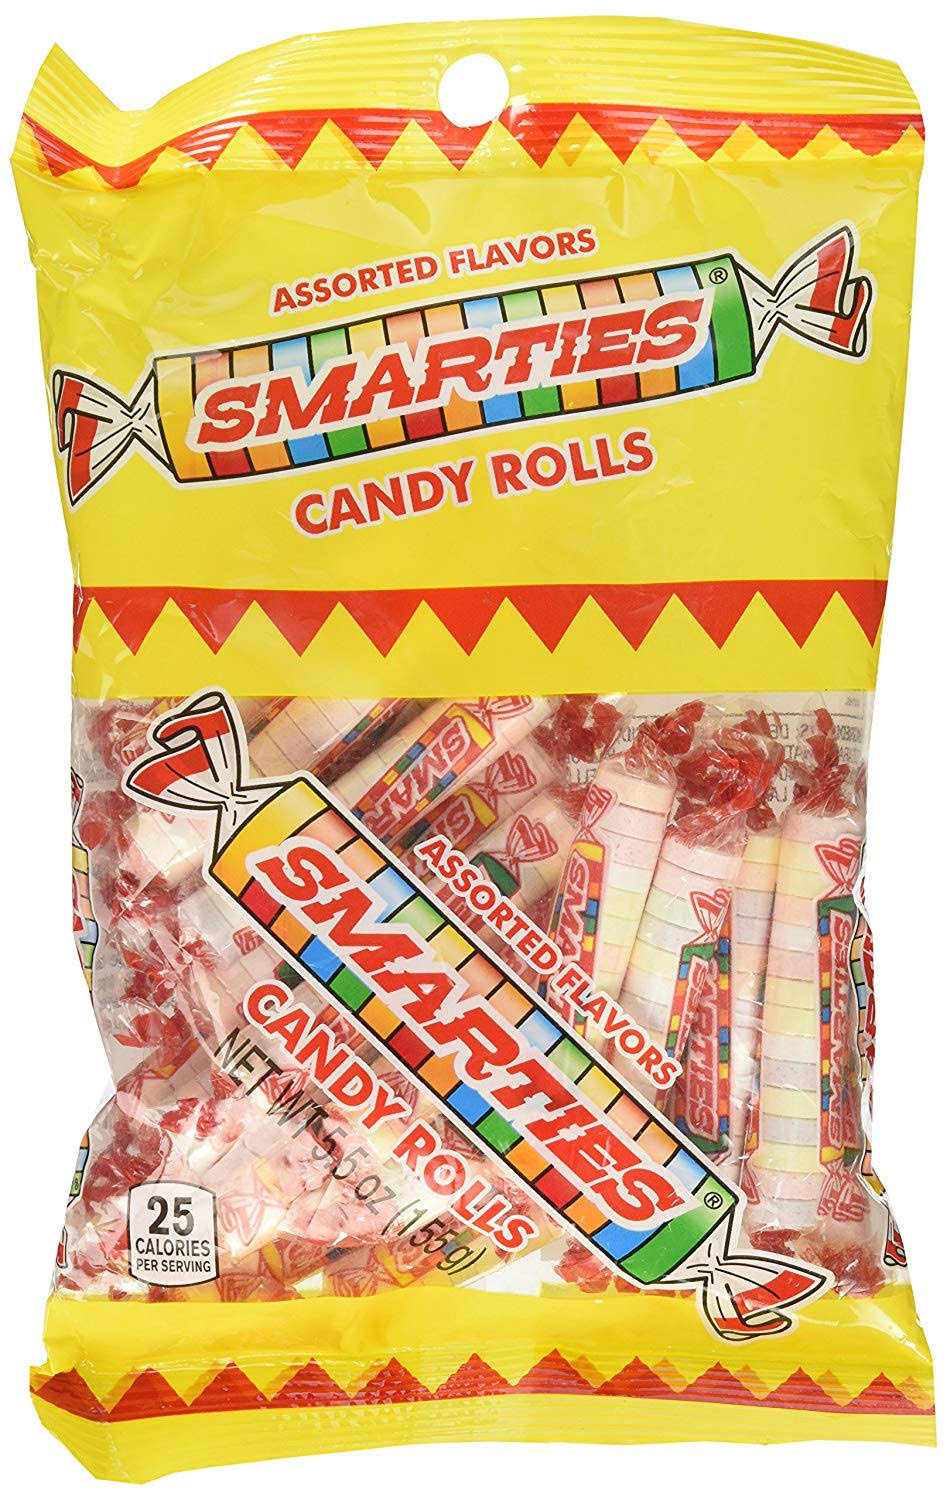 Smarties Candy Rolls - Assorted flavors, 5.5oz